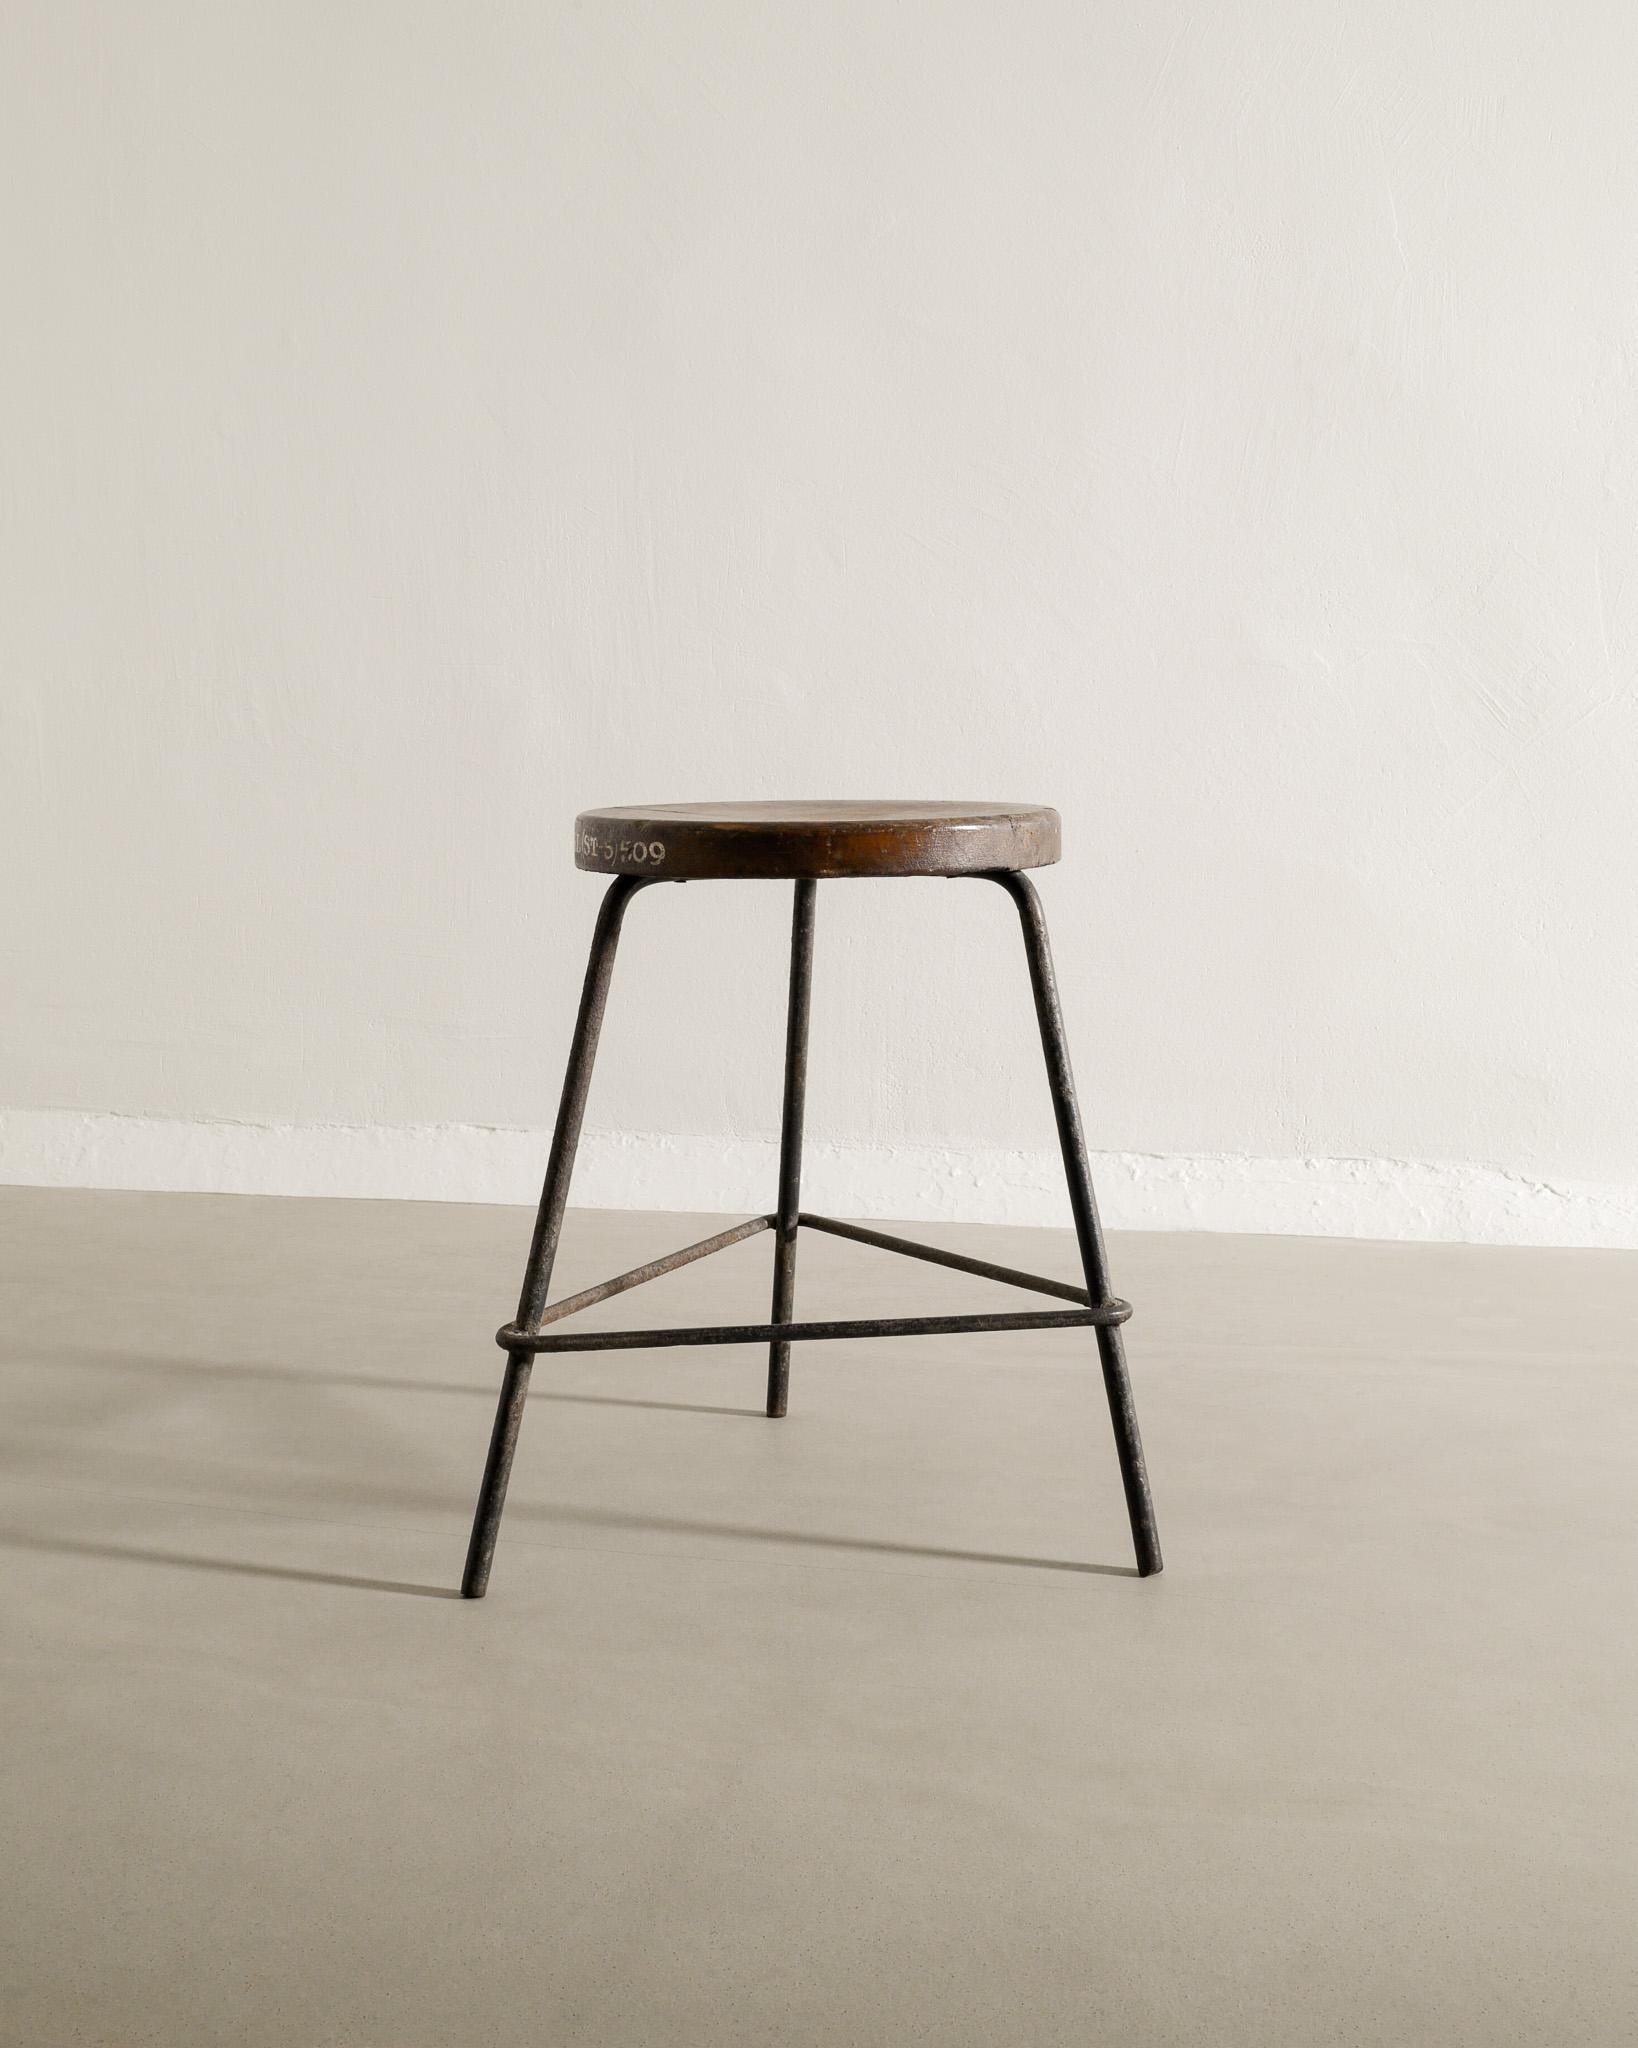 Indian Mid Century Pierre Jeanneret Stool in Teak & Iron Produced for Chandigarh, 1950s For Sale